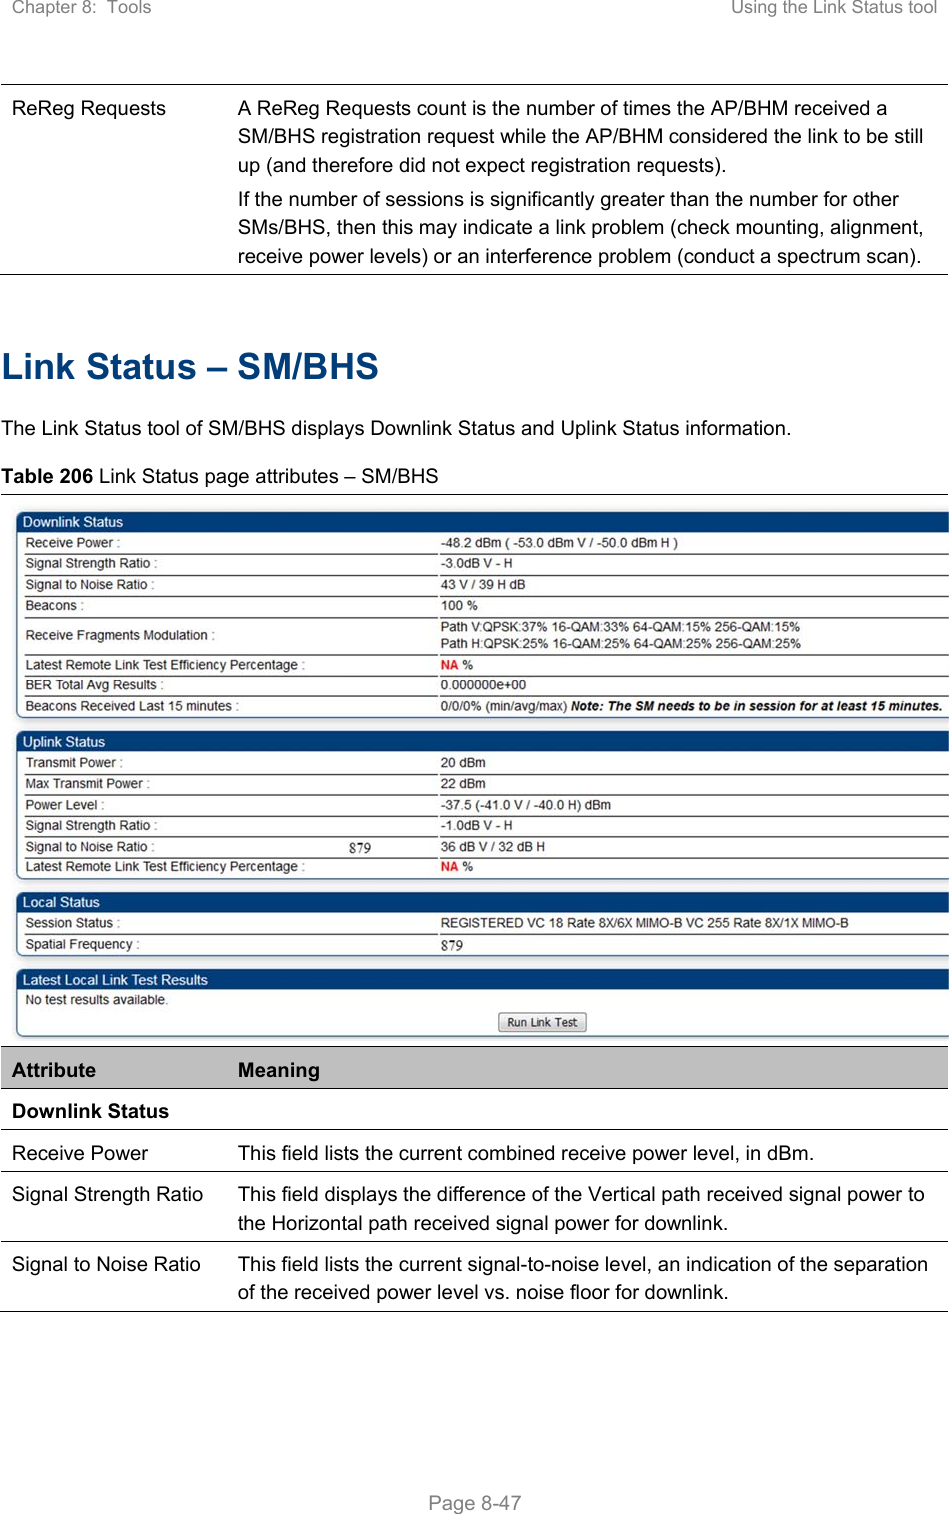 Chapter 8:  Tools  Using the Link Status tool   Page 8-47 ReReg Requests  A ReReg Requests count is the number of times the AP/BHM received a SM/BHS registration request while the AP/BHM considered the link to be still up (and therefore did not expect registration requests). If the number of sessions is significantly greater than the number for other SMs/BHS, then this may indicate a link problem (check mounting, alignment, receive power levels) or an interference problem (conduct a spectrum scan).  Link Status – SM/BHS The Link Status tool of SM/BHS displays Downlink Status and Uplink Status information. Table 206 Link Status page attributes – SM/BHS Attribute  Meaning Downlink Status  Receive Power  This field lists the current combined receive power level, in dBm. Signal Strength Ratio  This field displays the difference of the Vertical path received signal power to the Horizontal path received signal power for downlink. Signal to Noise Ratio  This field lists the current signal-to-noise level, an indication of the separation of the received power level vs. noise floor for downlink. 